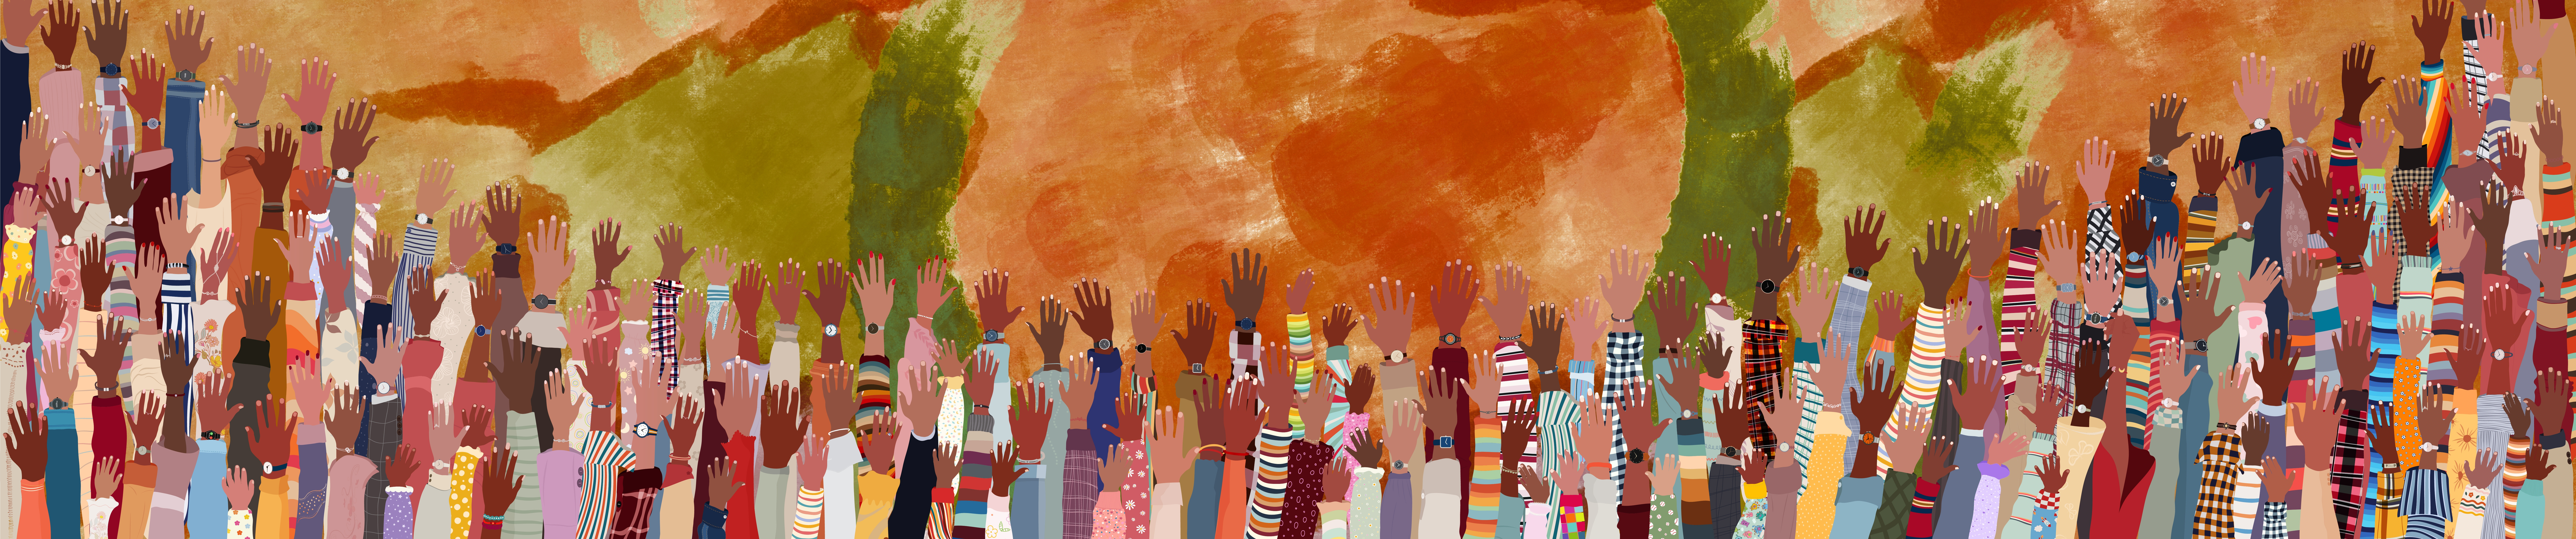 Artwork of many hands of diverse skin colors raised together